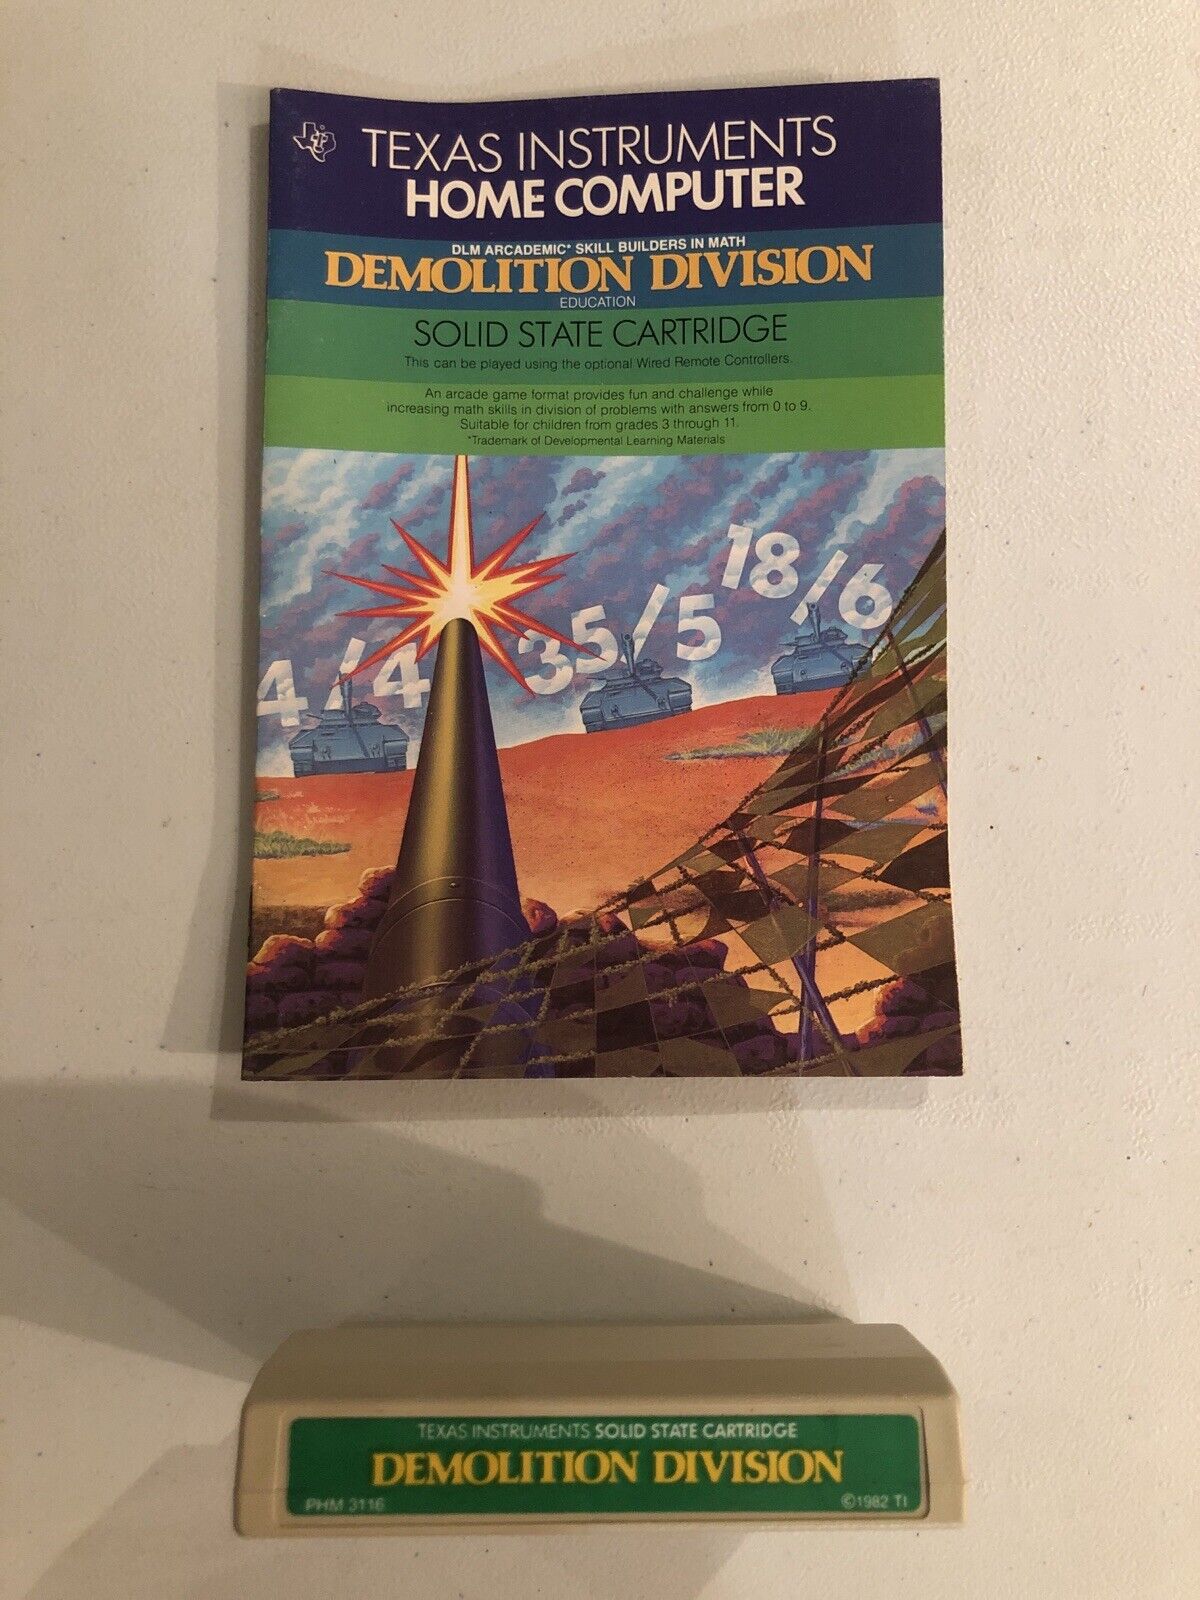 RARE VINTAGE Texas Instruments Demolition Division Video Game W Manual TI-99 4A